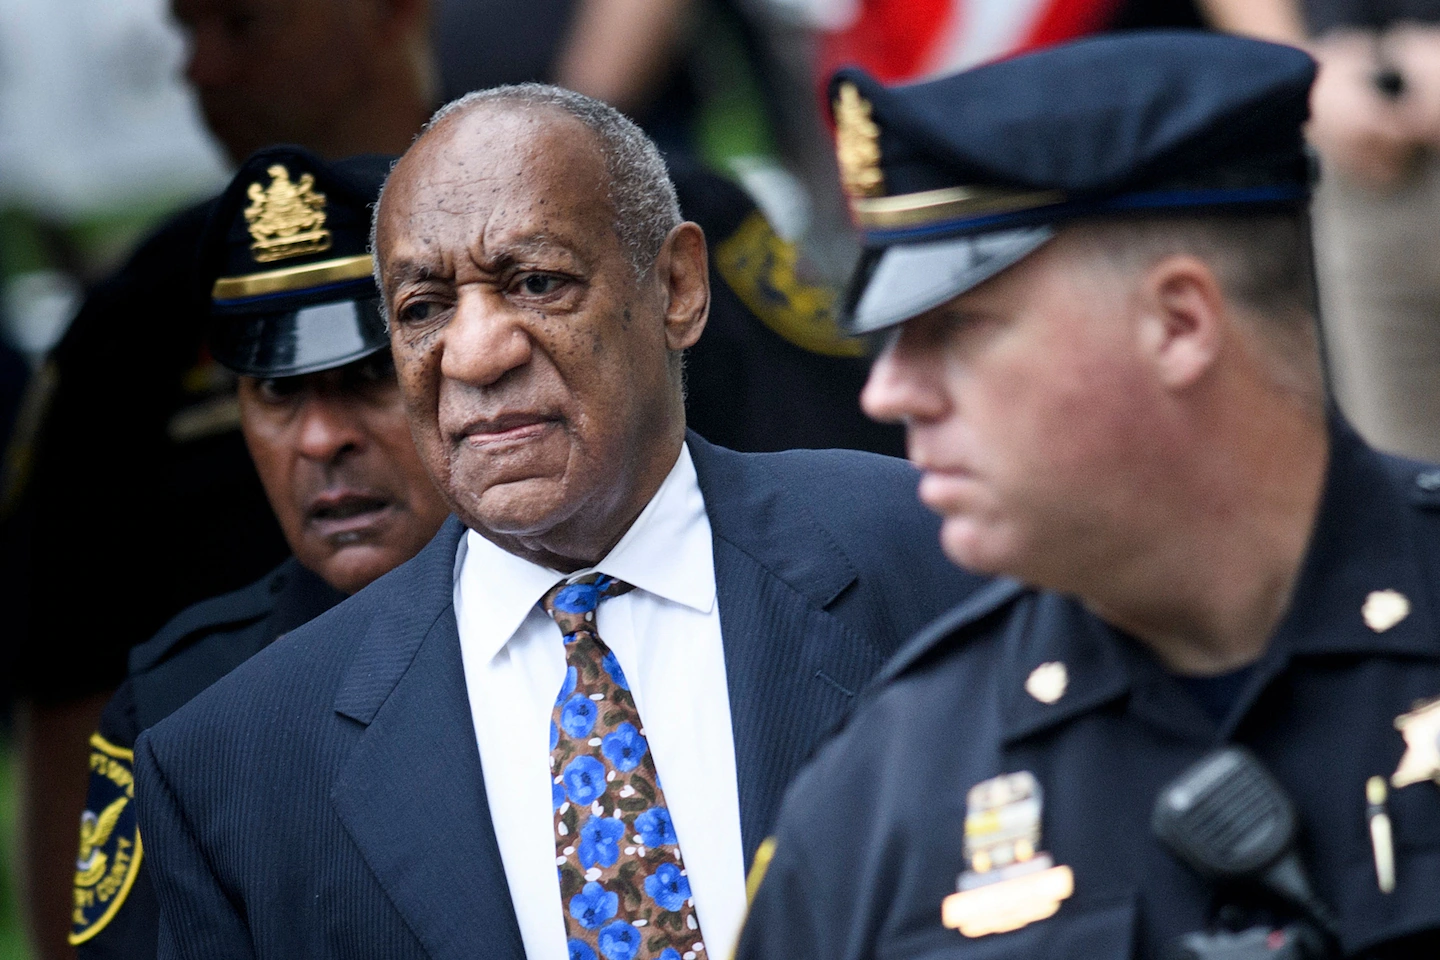 Bill Cosby sexually assaulted Judy Huth at the Playboy mansion, jury finds